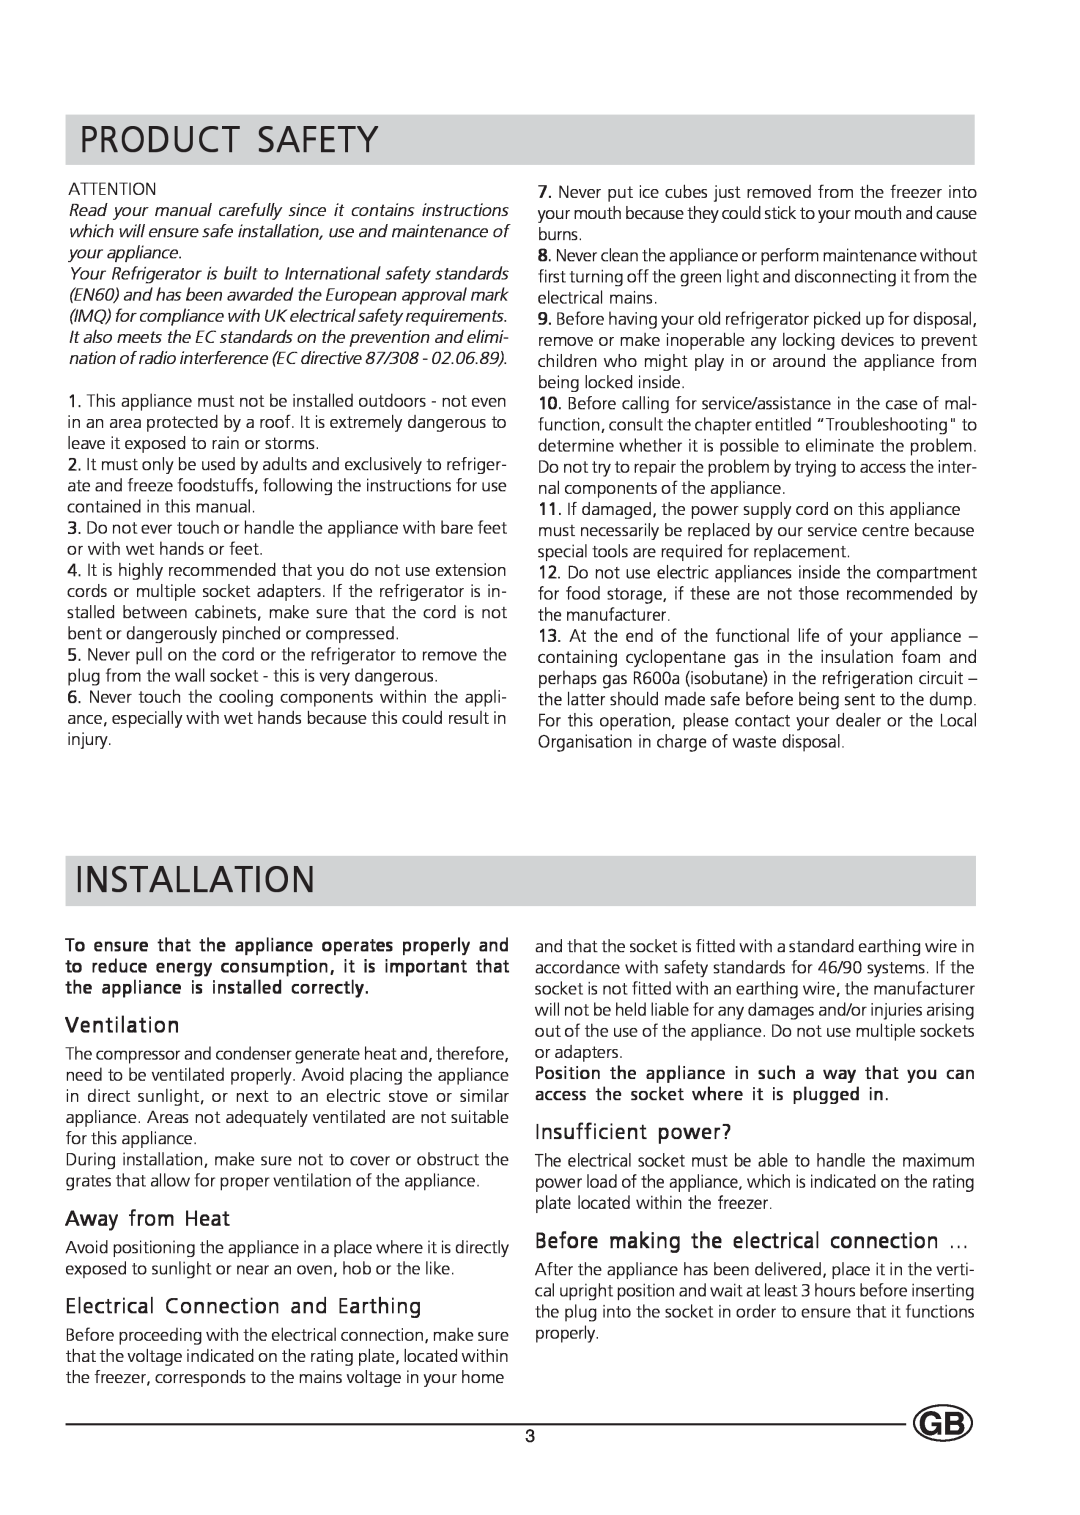 Hotpoint HUZ121 manual Product Safety, Installation, Ventilation, Away from Heat, Electrical Connection and Earthing 